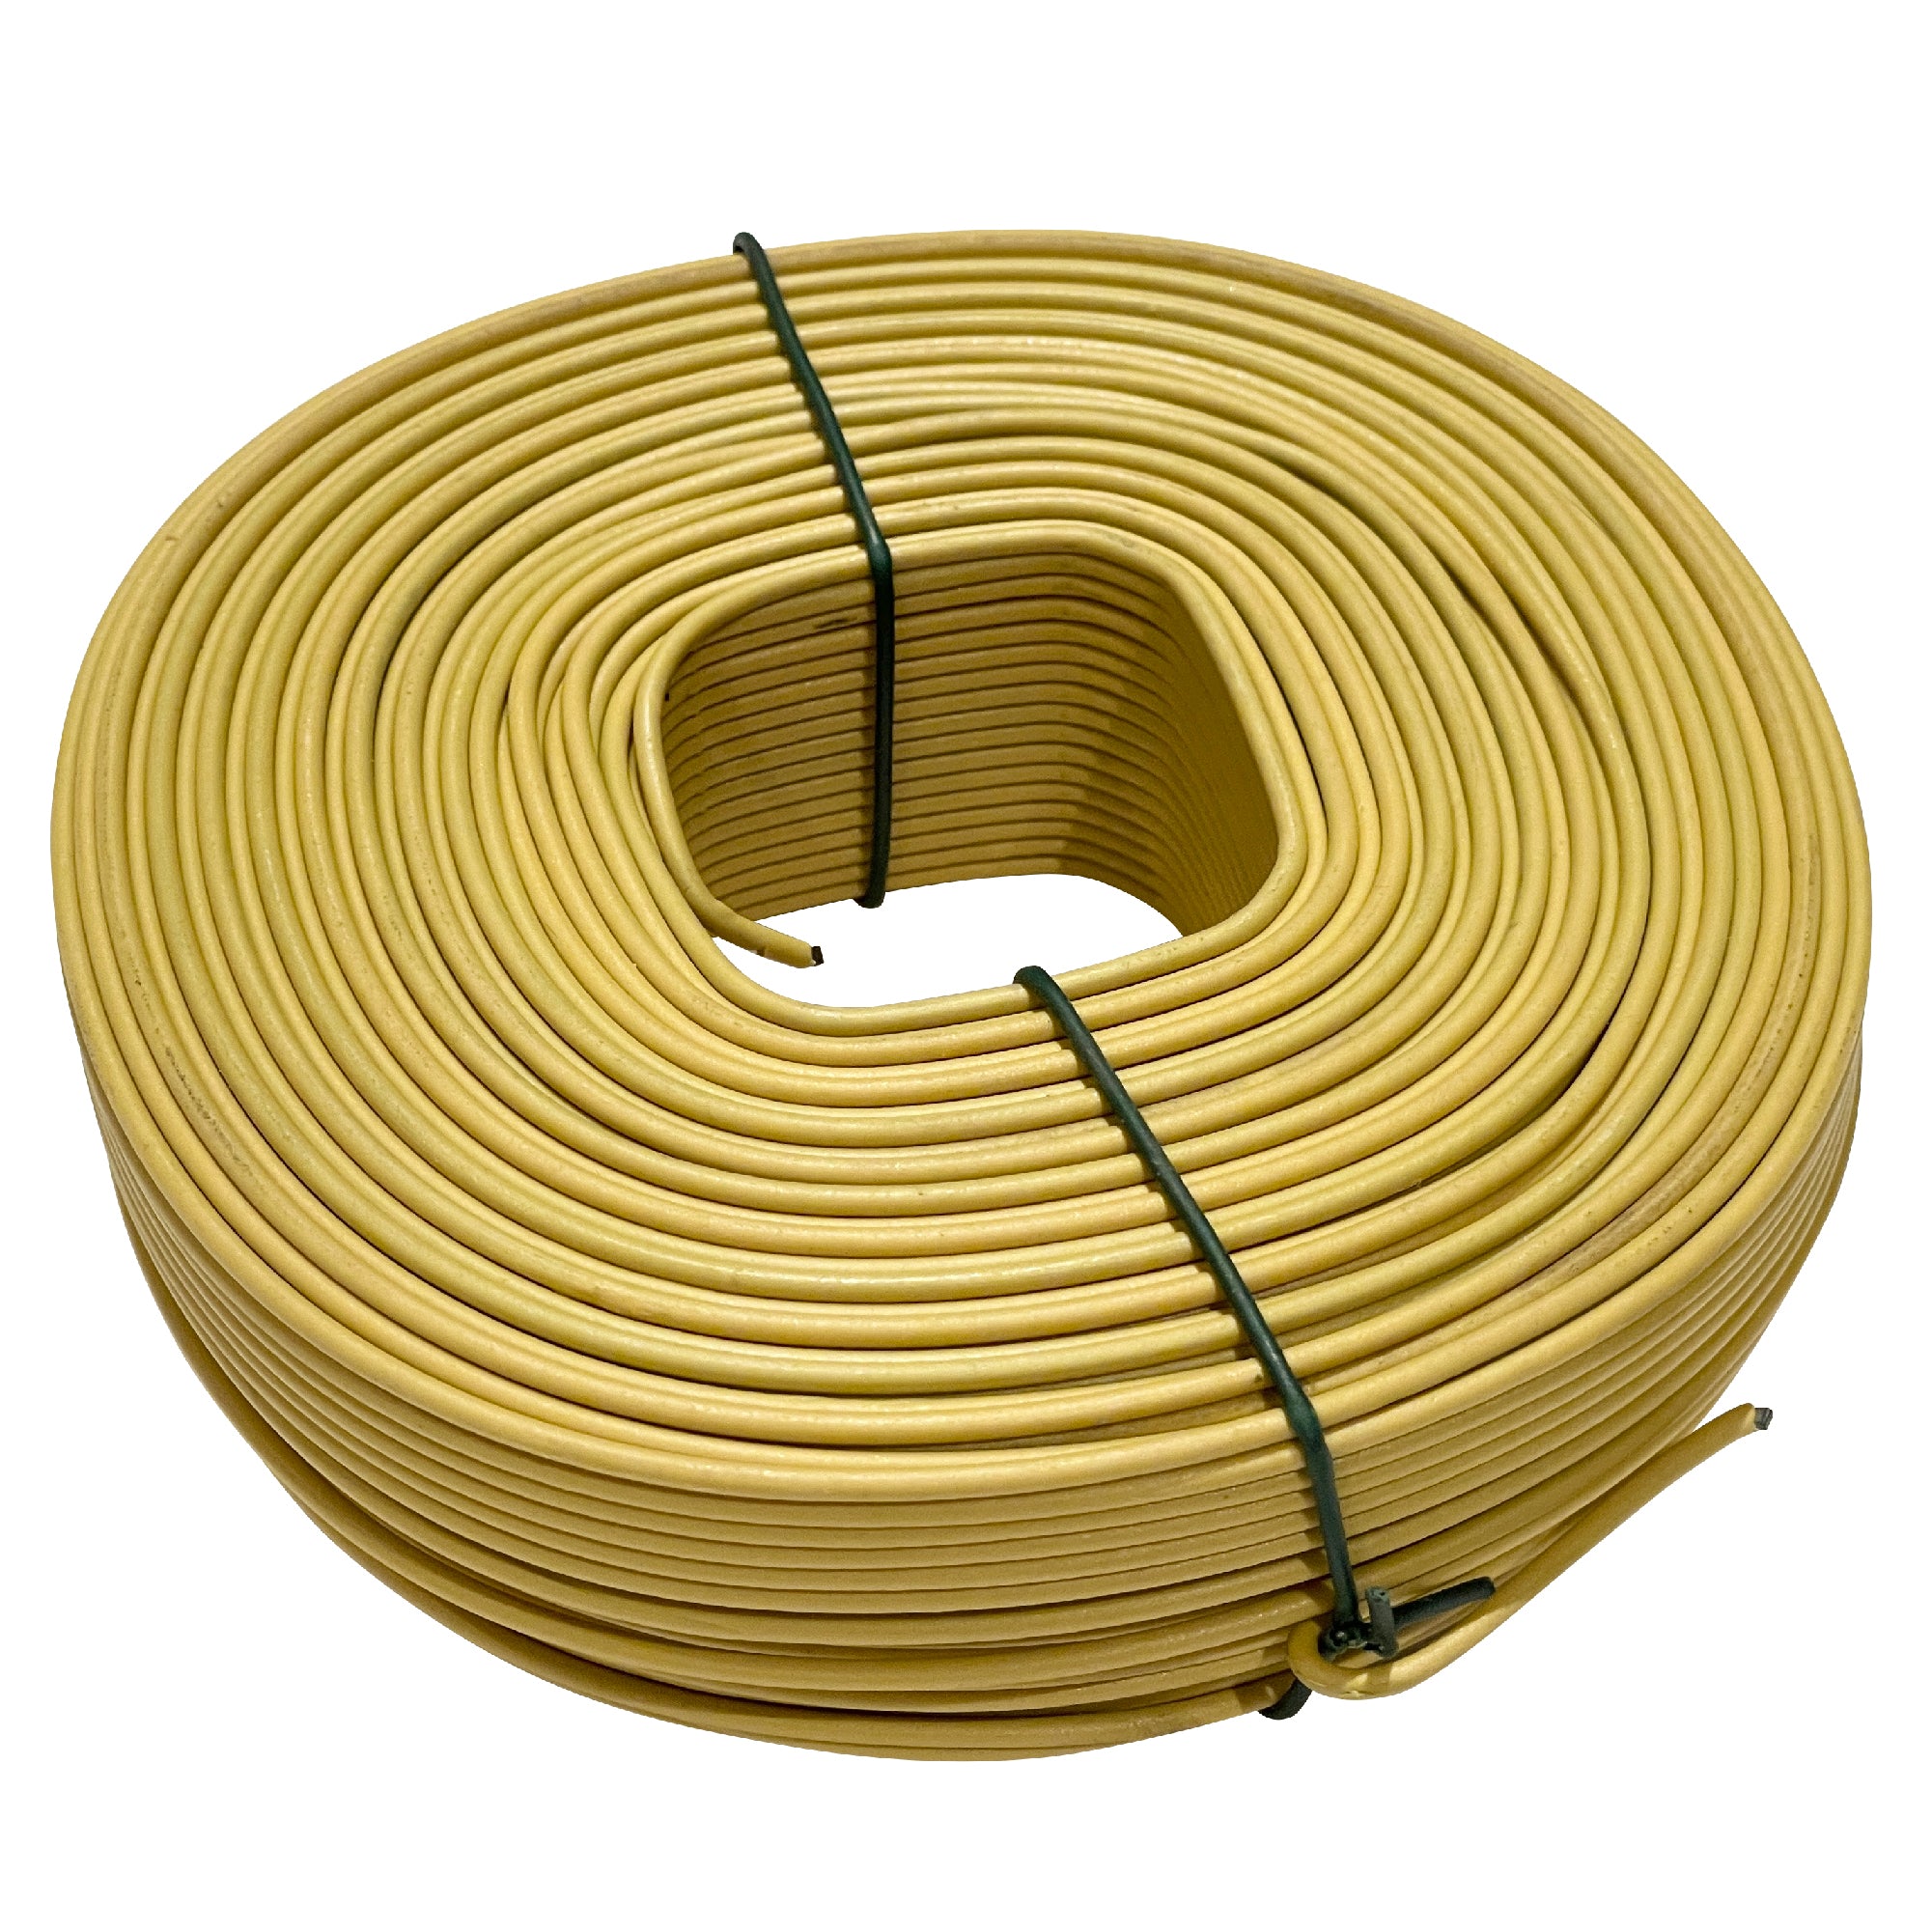 Anchor Wire Plastic Coated Garden Wire at